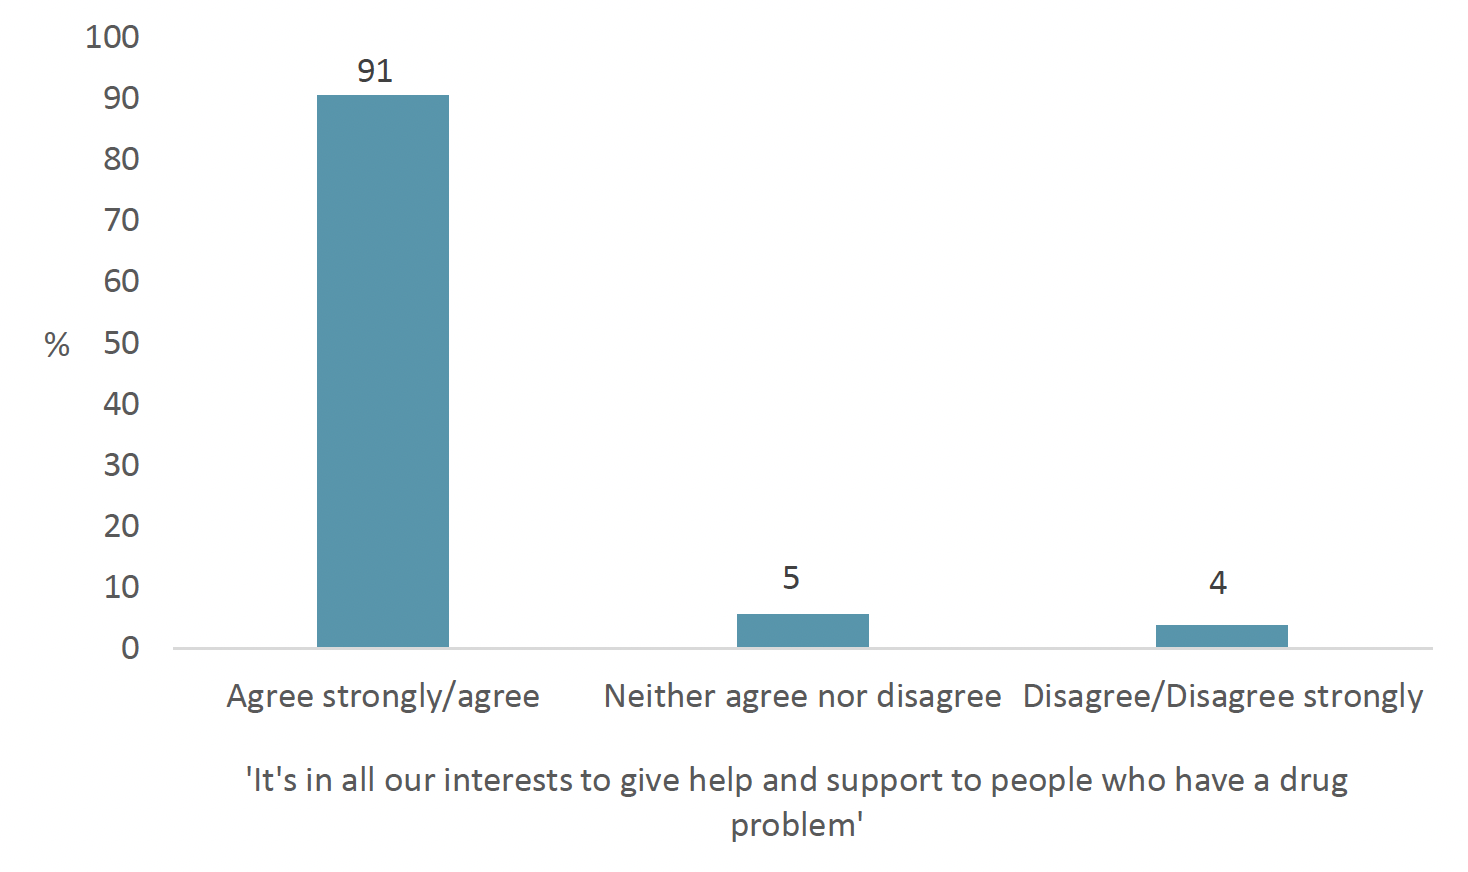 Bar graph showing that 91% of respondents indicated that they agree or strongly agree that it is in all our interests to give help and support to people who have a drug problem.